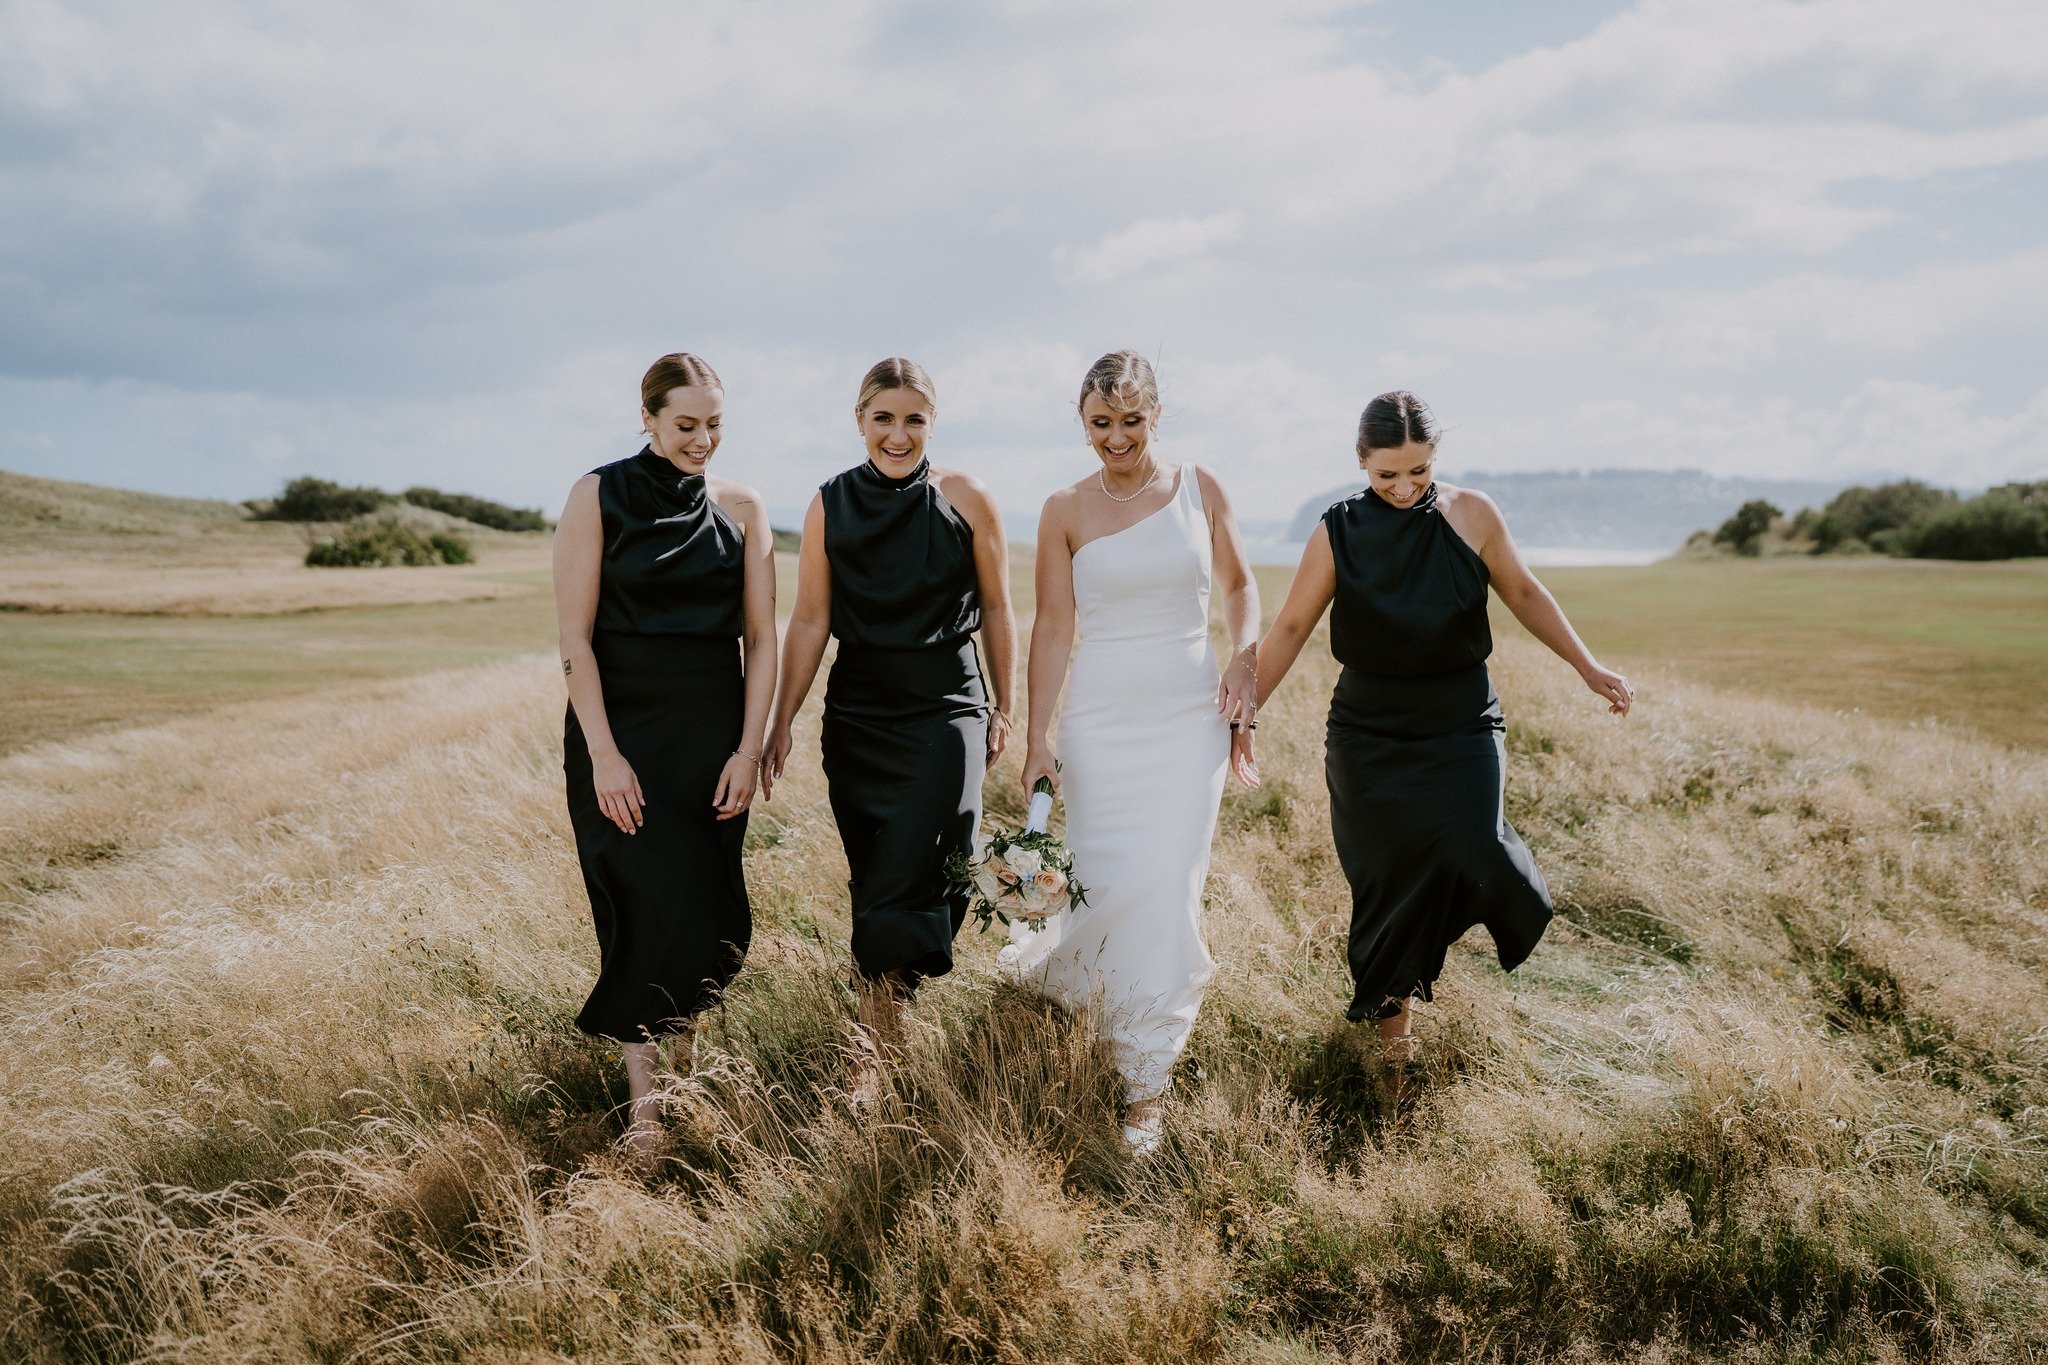 The Bride Squad.

We adore that Bridget changed up the flowers for the bridesmaids and instead gifted  adorable bags the girl held. An item the can treasure forever. 

Selecting your bridal party isn't always an easy decision, as we want to share our